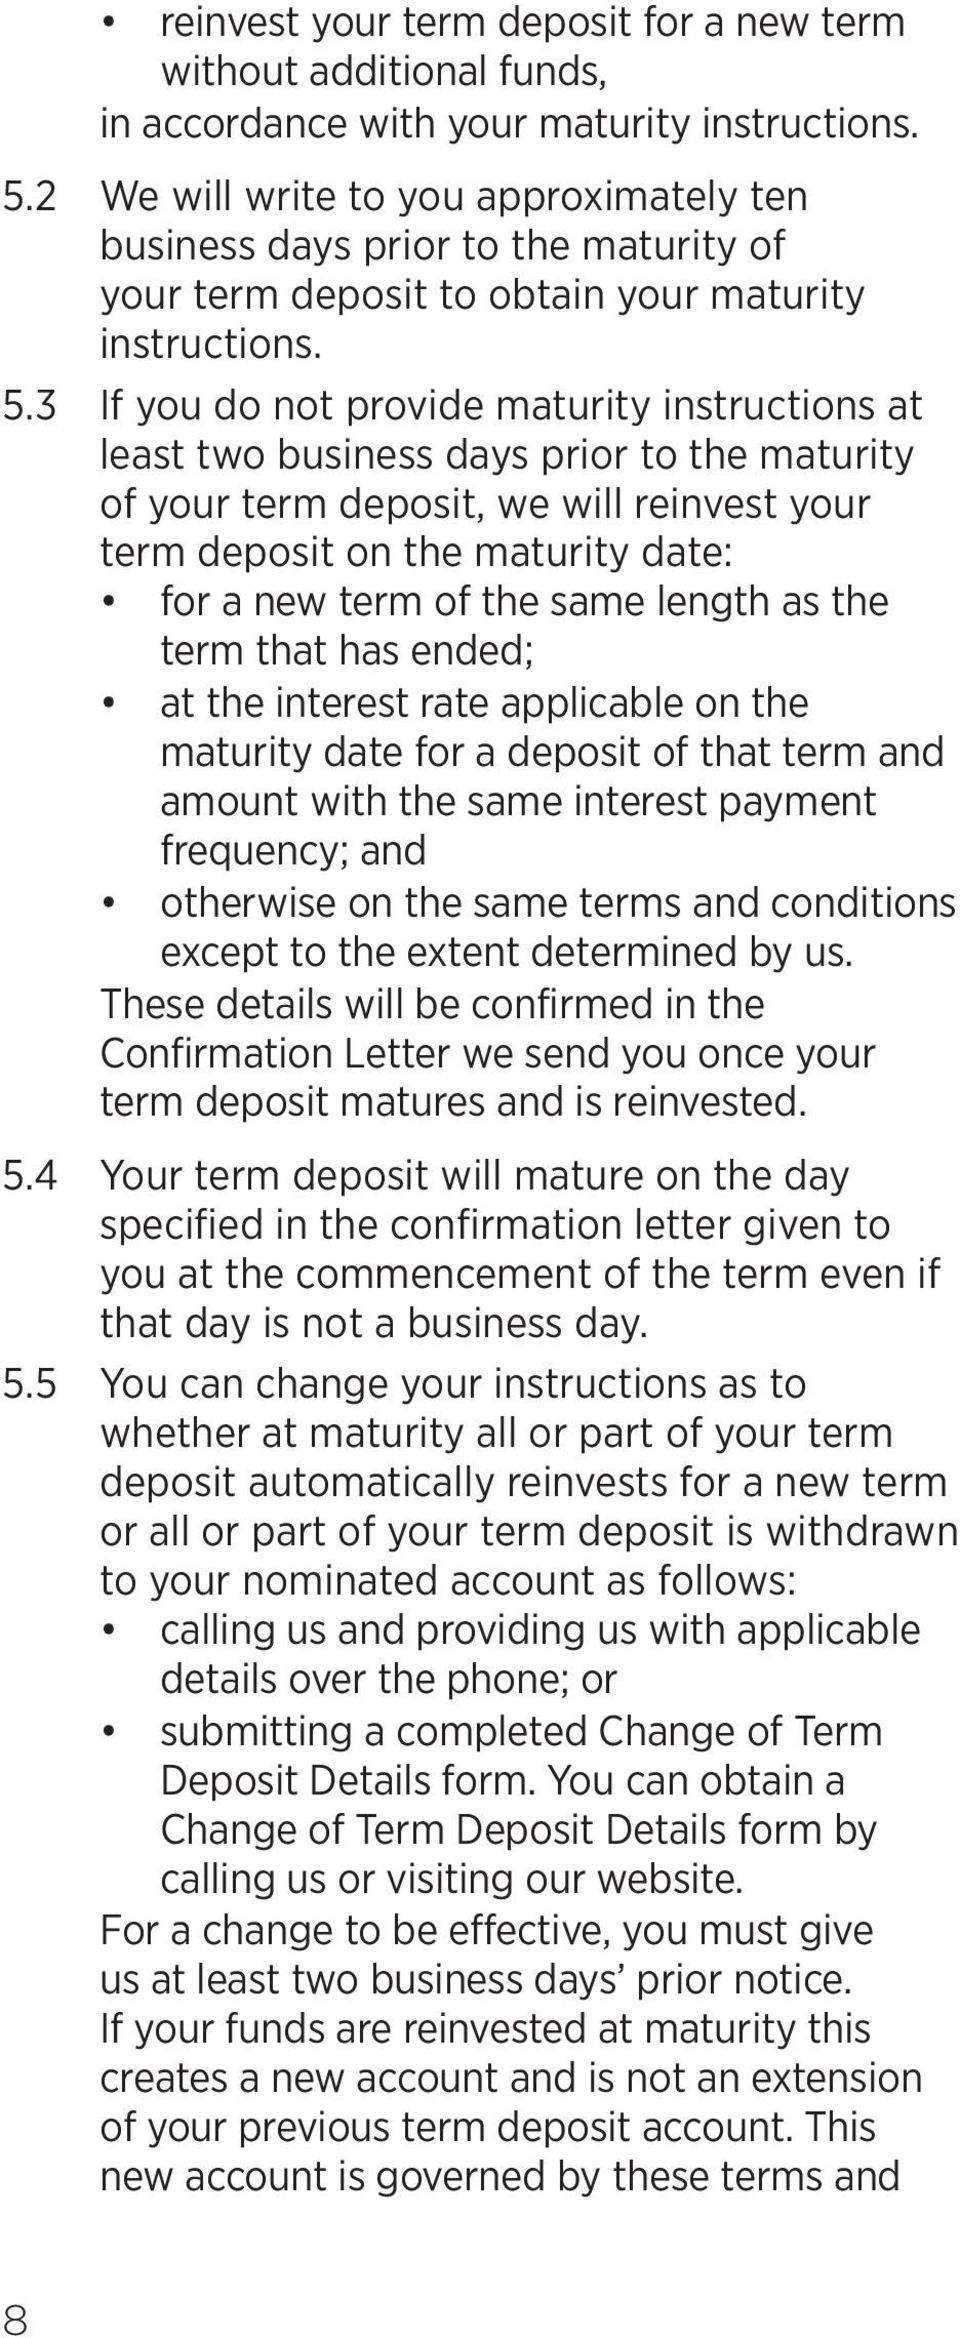 3 If you do not provide maturity instructions at least two business days prior to the maturity of your term deposit, we will reinvest your term deposit on the maturity date: for a new term of the